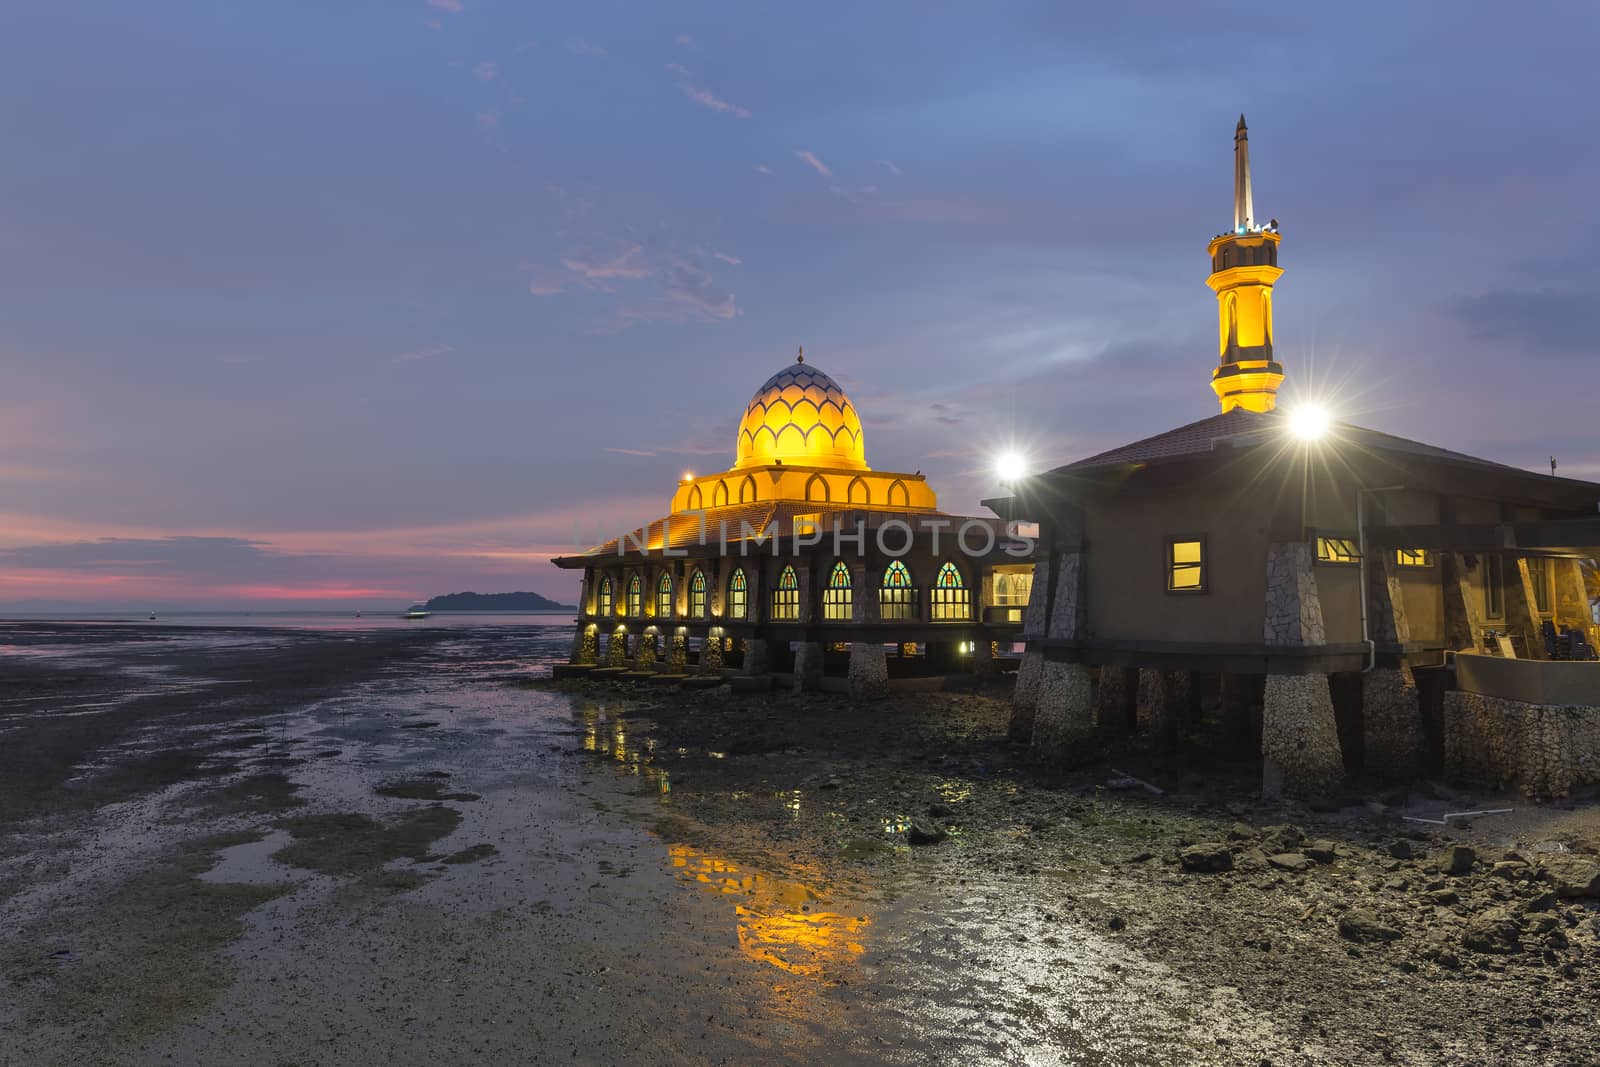 Masjid Al-Hussain is Kuala Perlis’ well-known icon. Built next to the Kuala Perlis Jetty, the mosque’s structure extends over the Straits of Malacca, earning it the nickname ‘Floating Mosque’. A 50-metre bridge connects to the main prayer hall above the water.